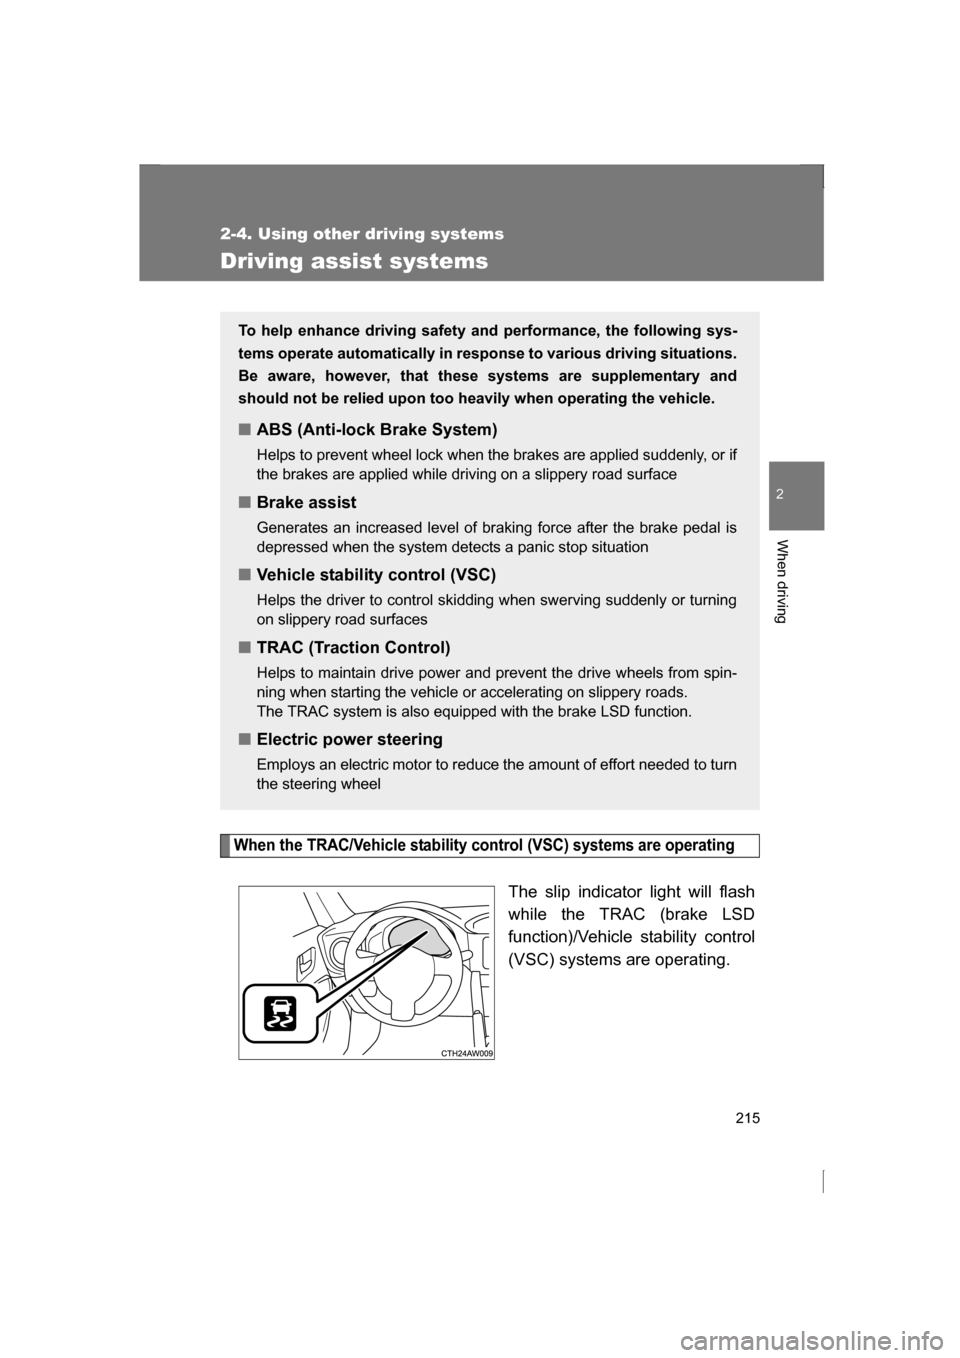 SUBARU BRZ 2013 1.G User Guide 215
2-4. Using other driving systems
2
When driving
Driving assist systems
When the TRAC/Vehicle stability control (VSC) systems are operating
The slip indicator light will flash 
while the TRAC (brak